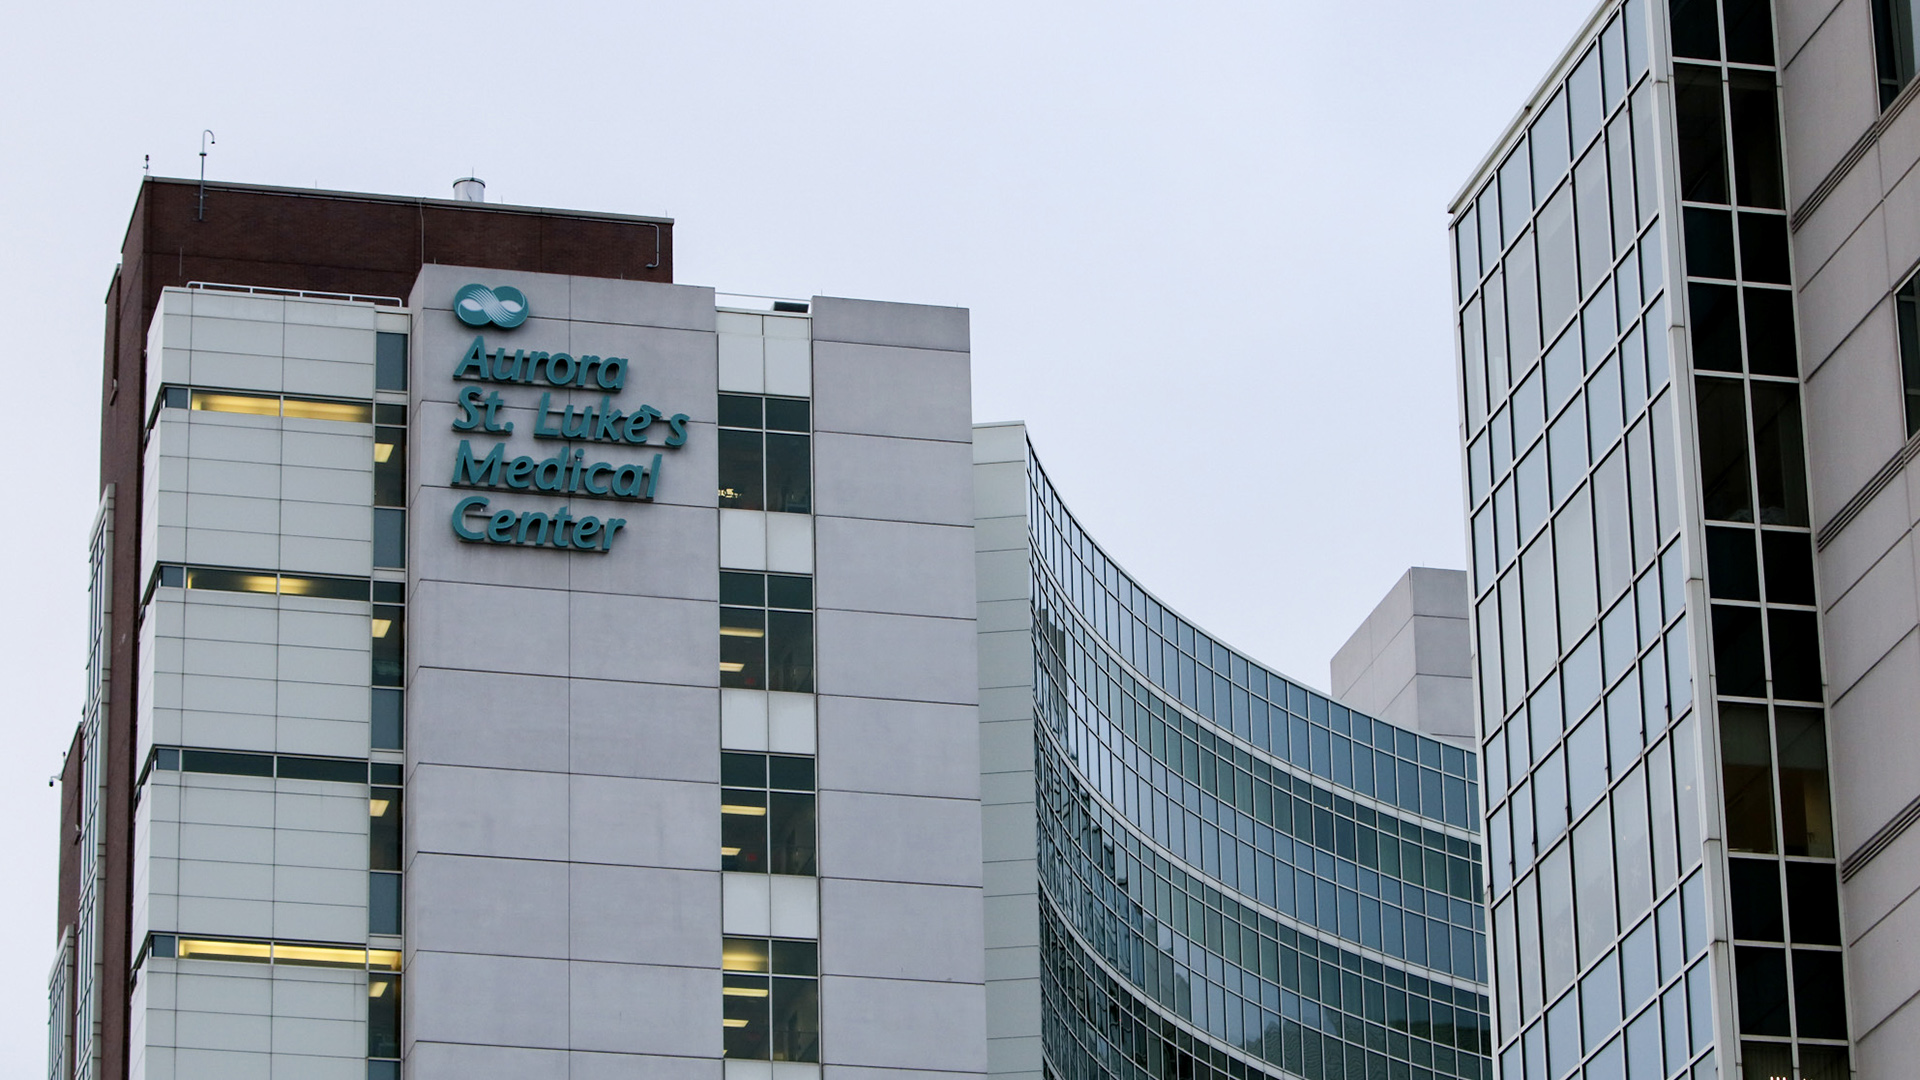 A multi-story building with large glass windows includes a letter sign near its roof that reads "Aurora St. Luke's Medical Center."